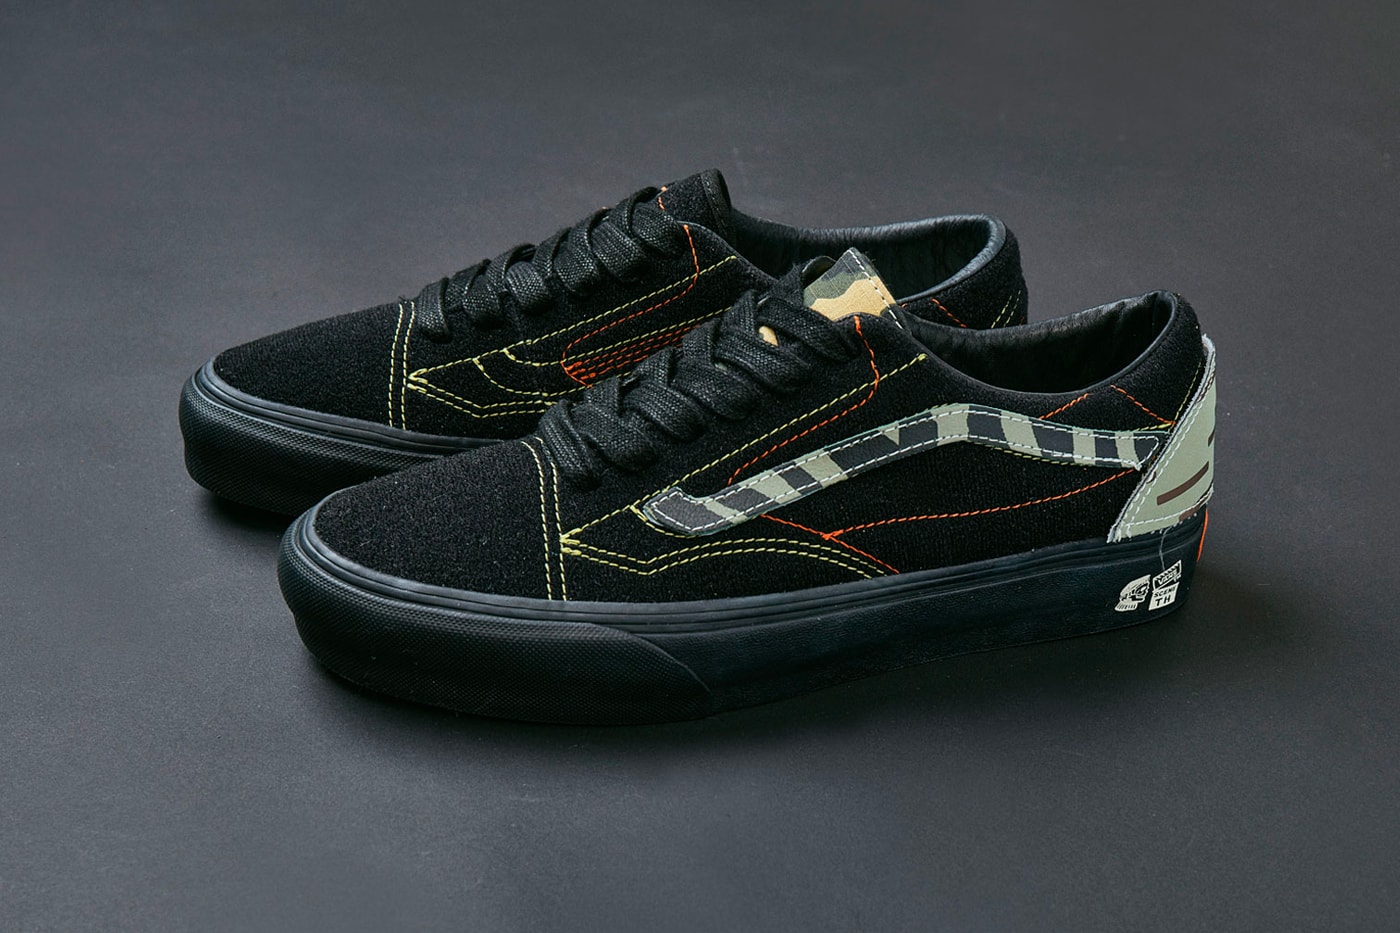 Vans Taka Hayashi Design It Yourself pack footwear shoes sneakers menswear fall winter 2020 collection fw20 kicks trainers runners 